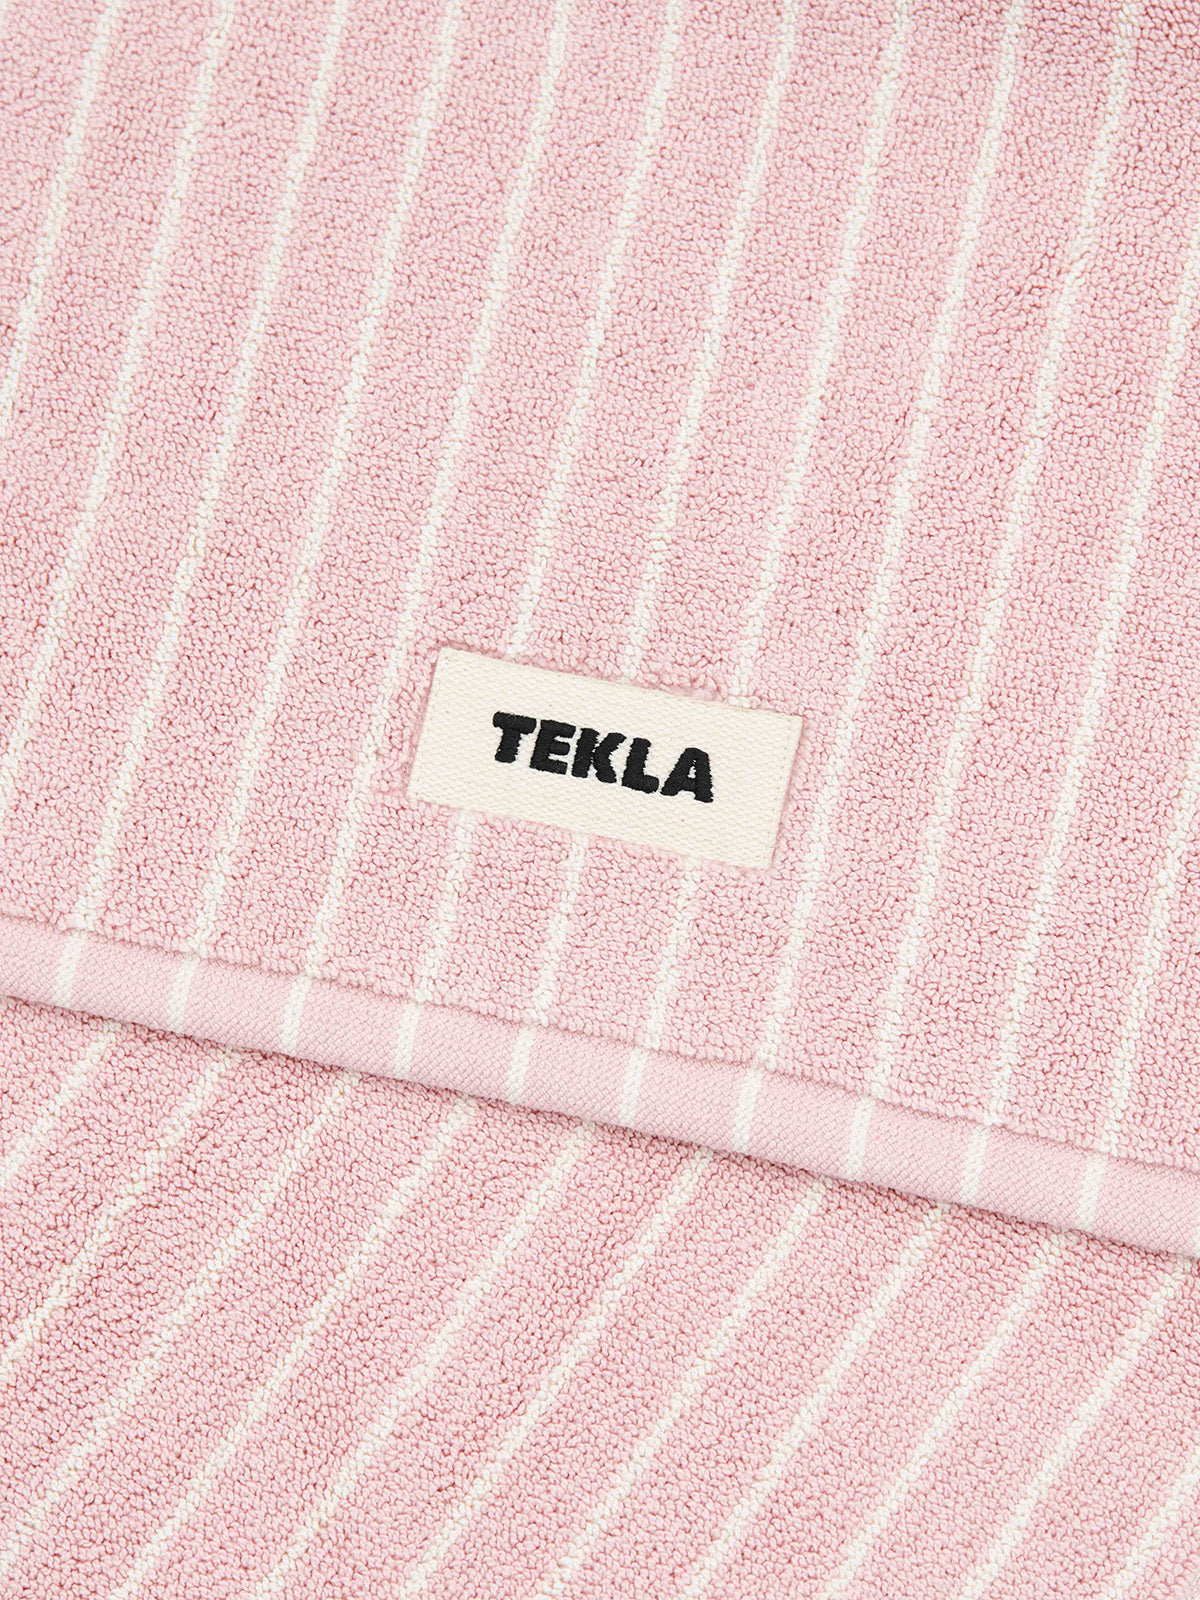 Bath mat in Shaded Pink Stripes